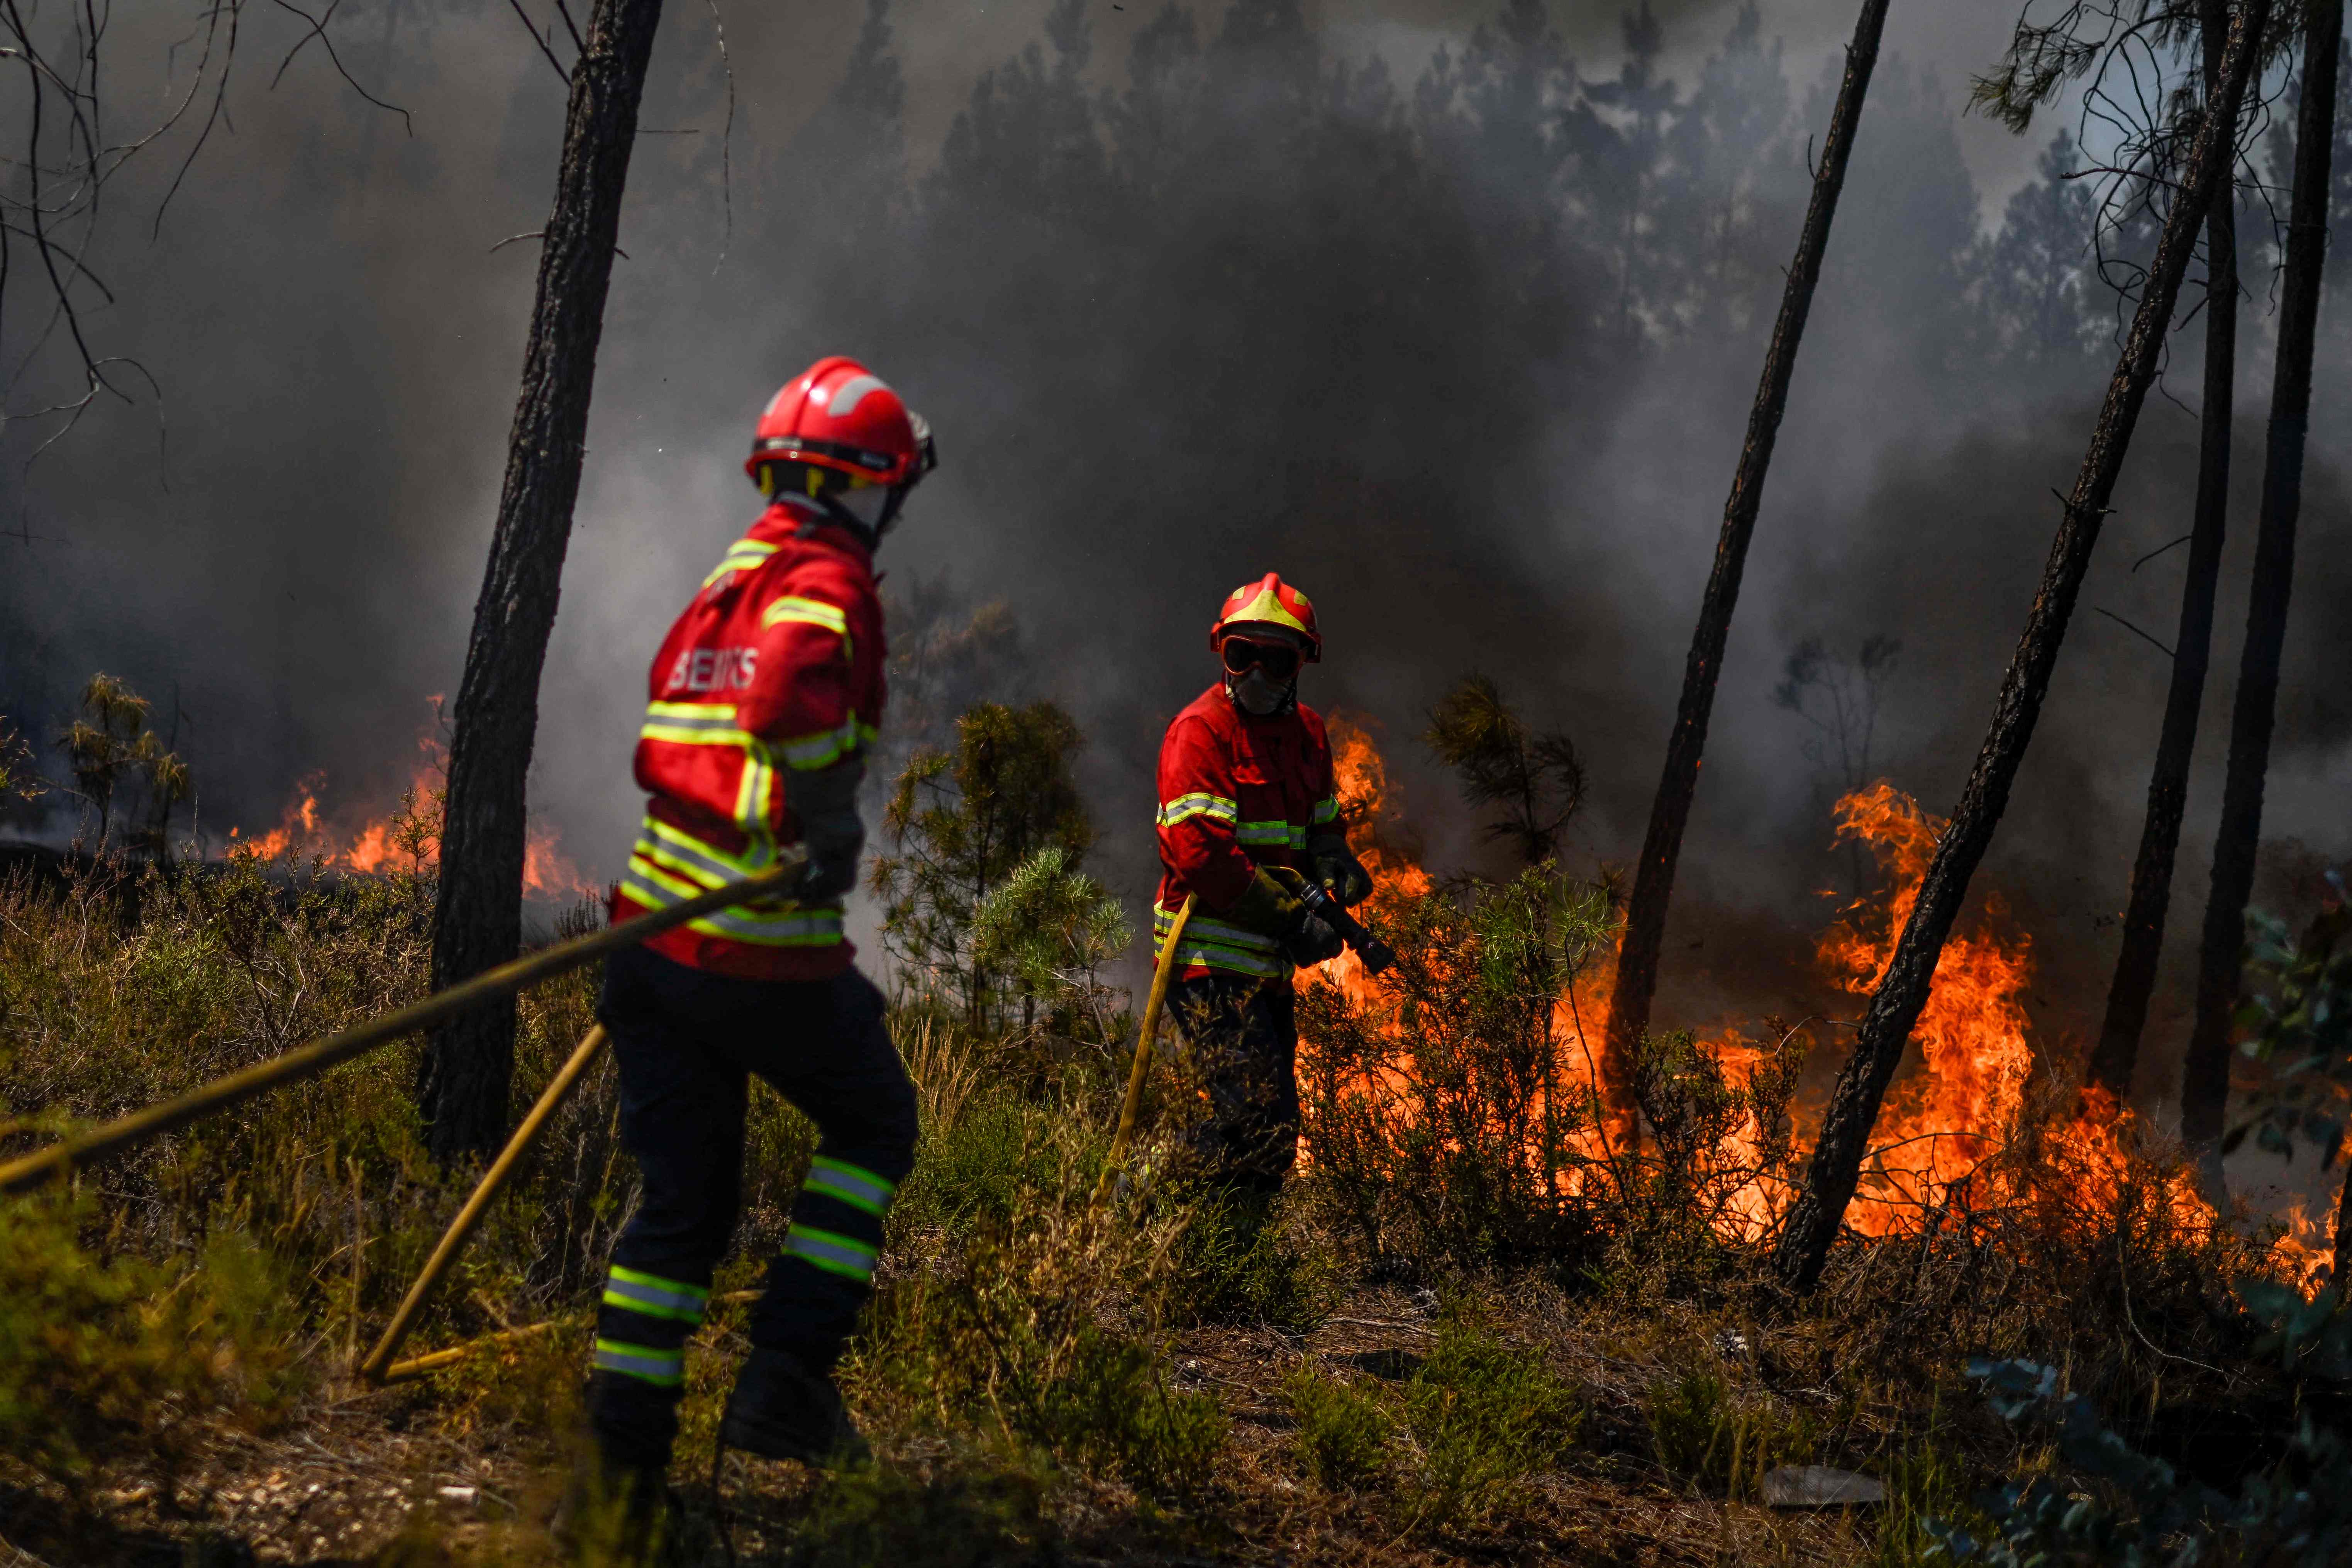 More than 1,000 firefighters battled a wildfire in central Portugal on Sunday